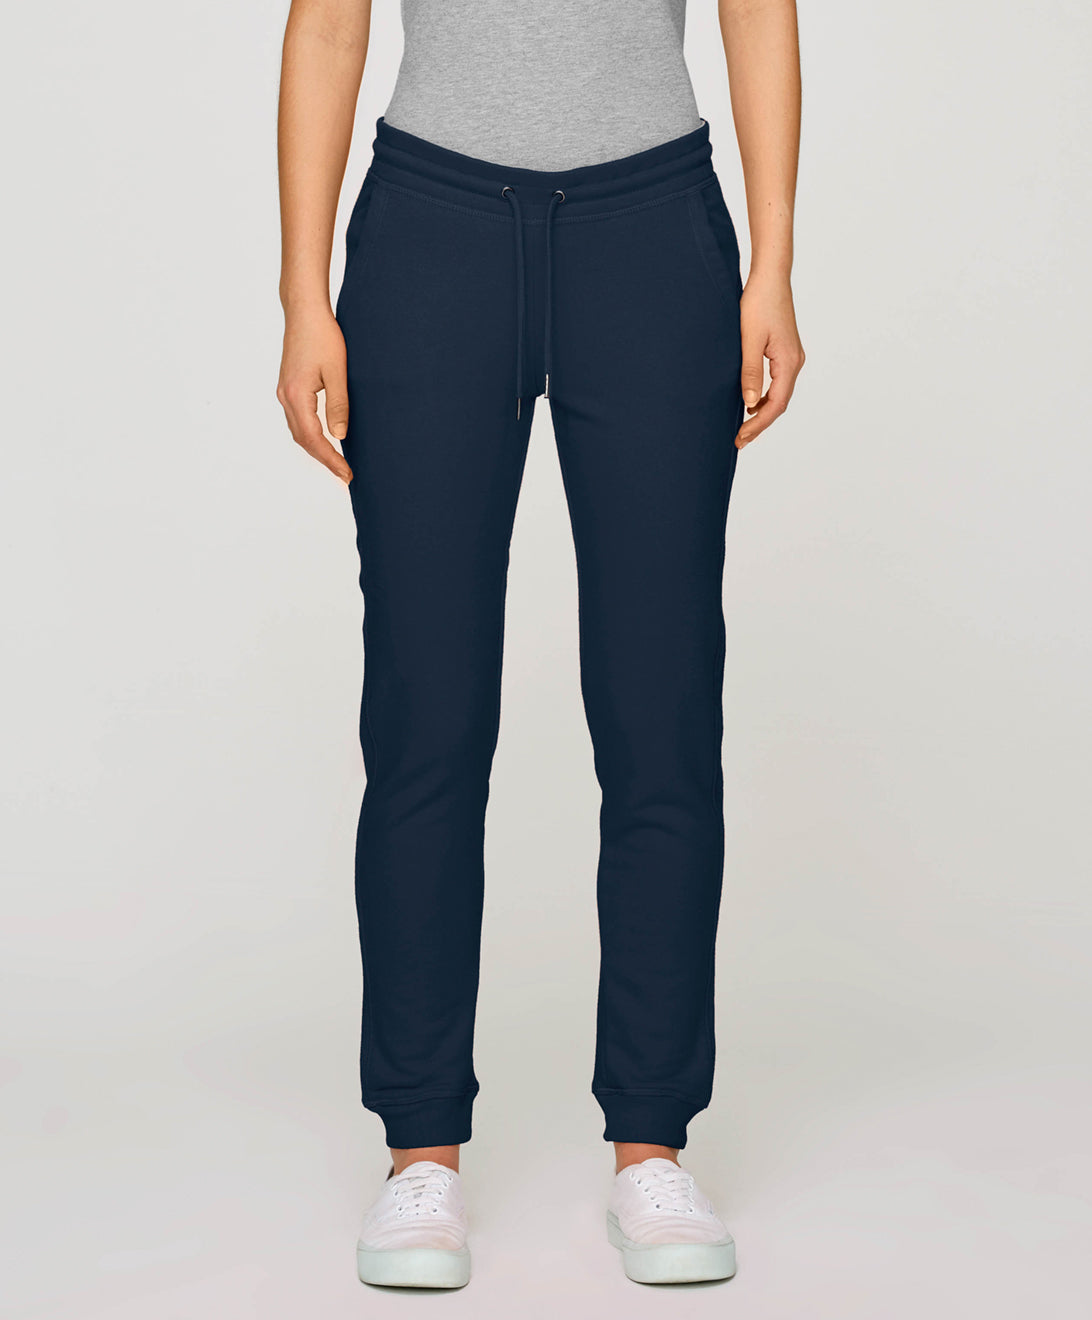 Fitted Trousers French Navy Women